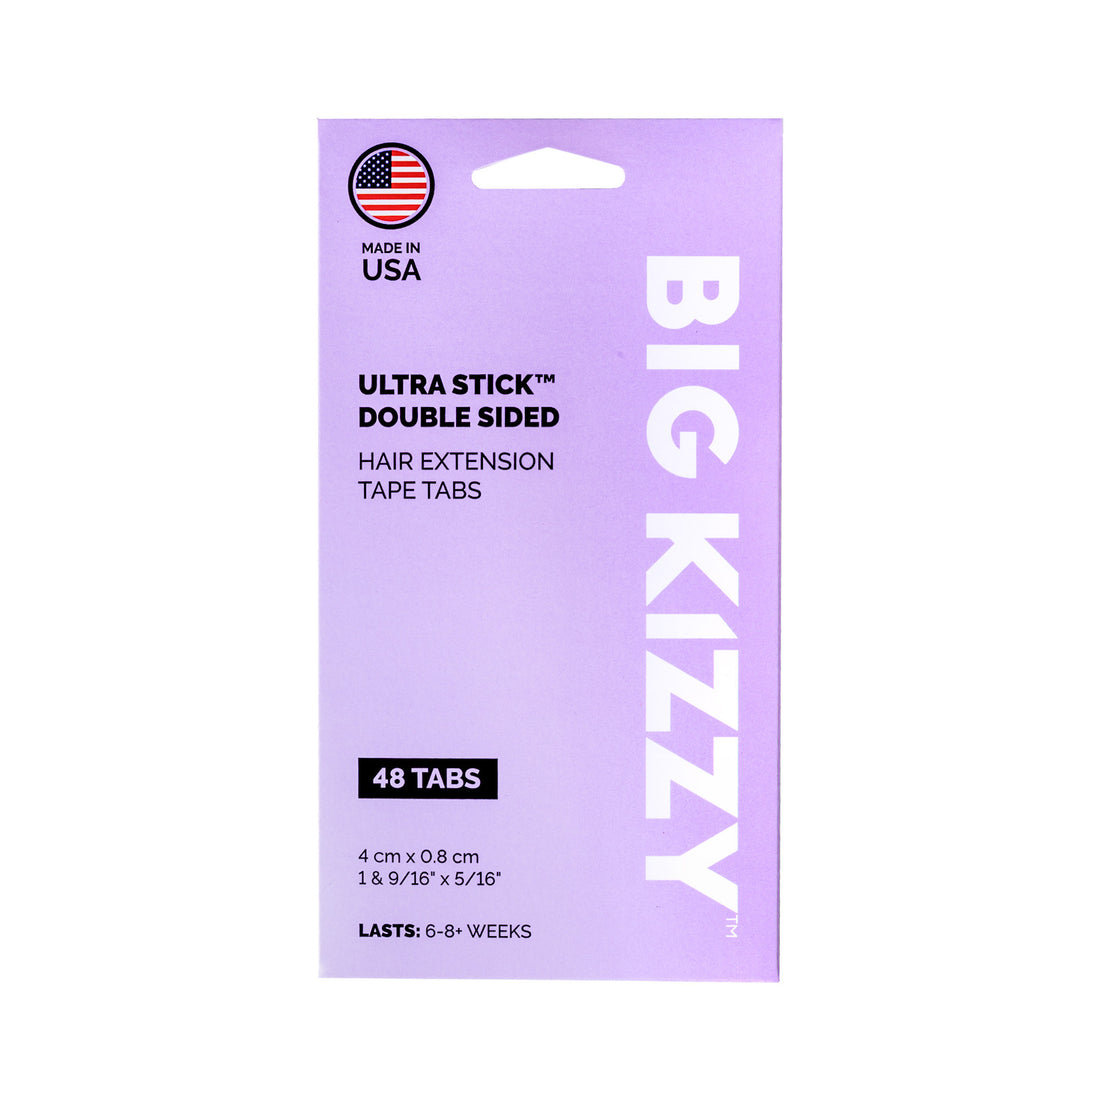 A pack of Big Kizzy® Ultra Stick Double Sided Hair Extension Replacement Tape Tabs, 48 tabs